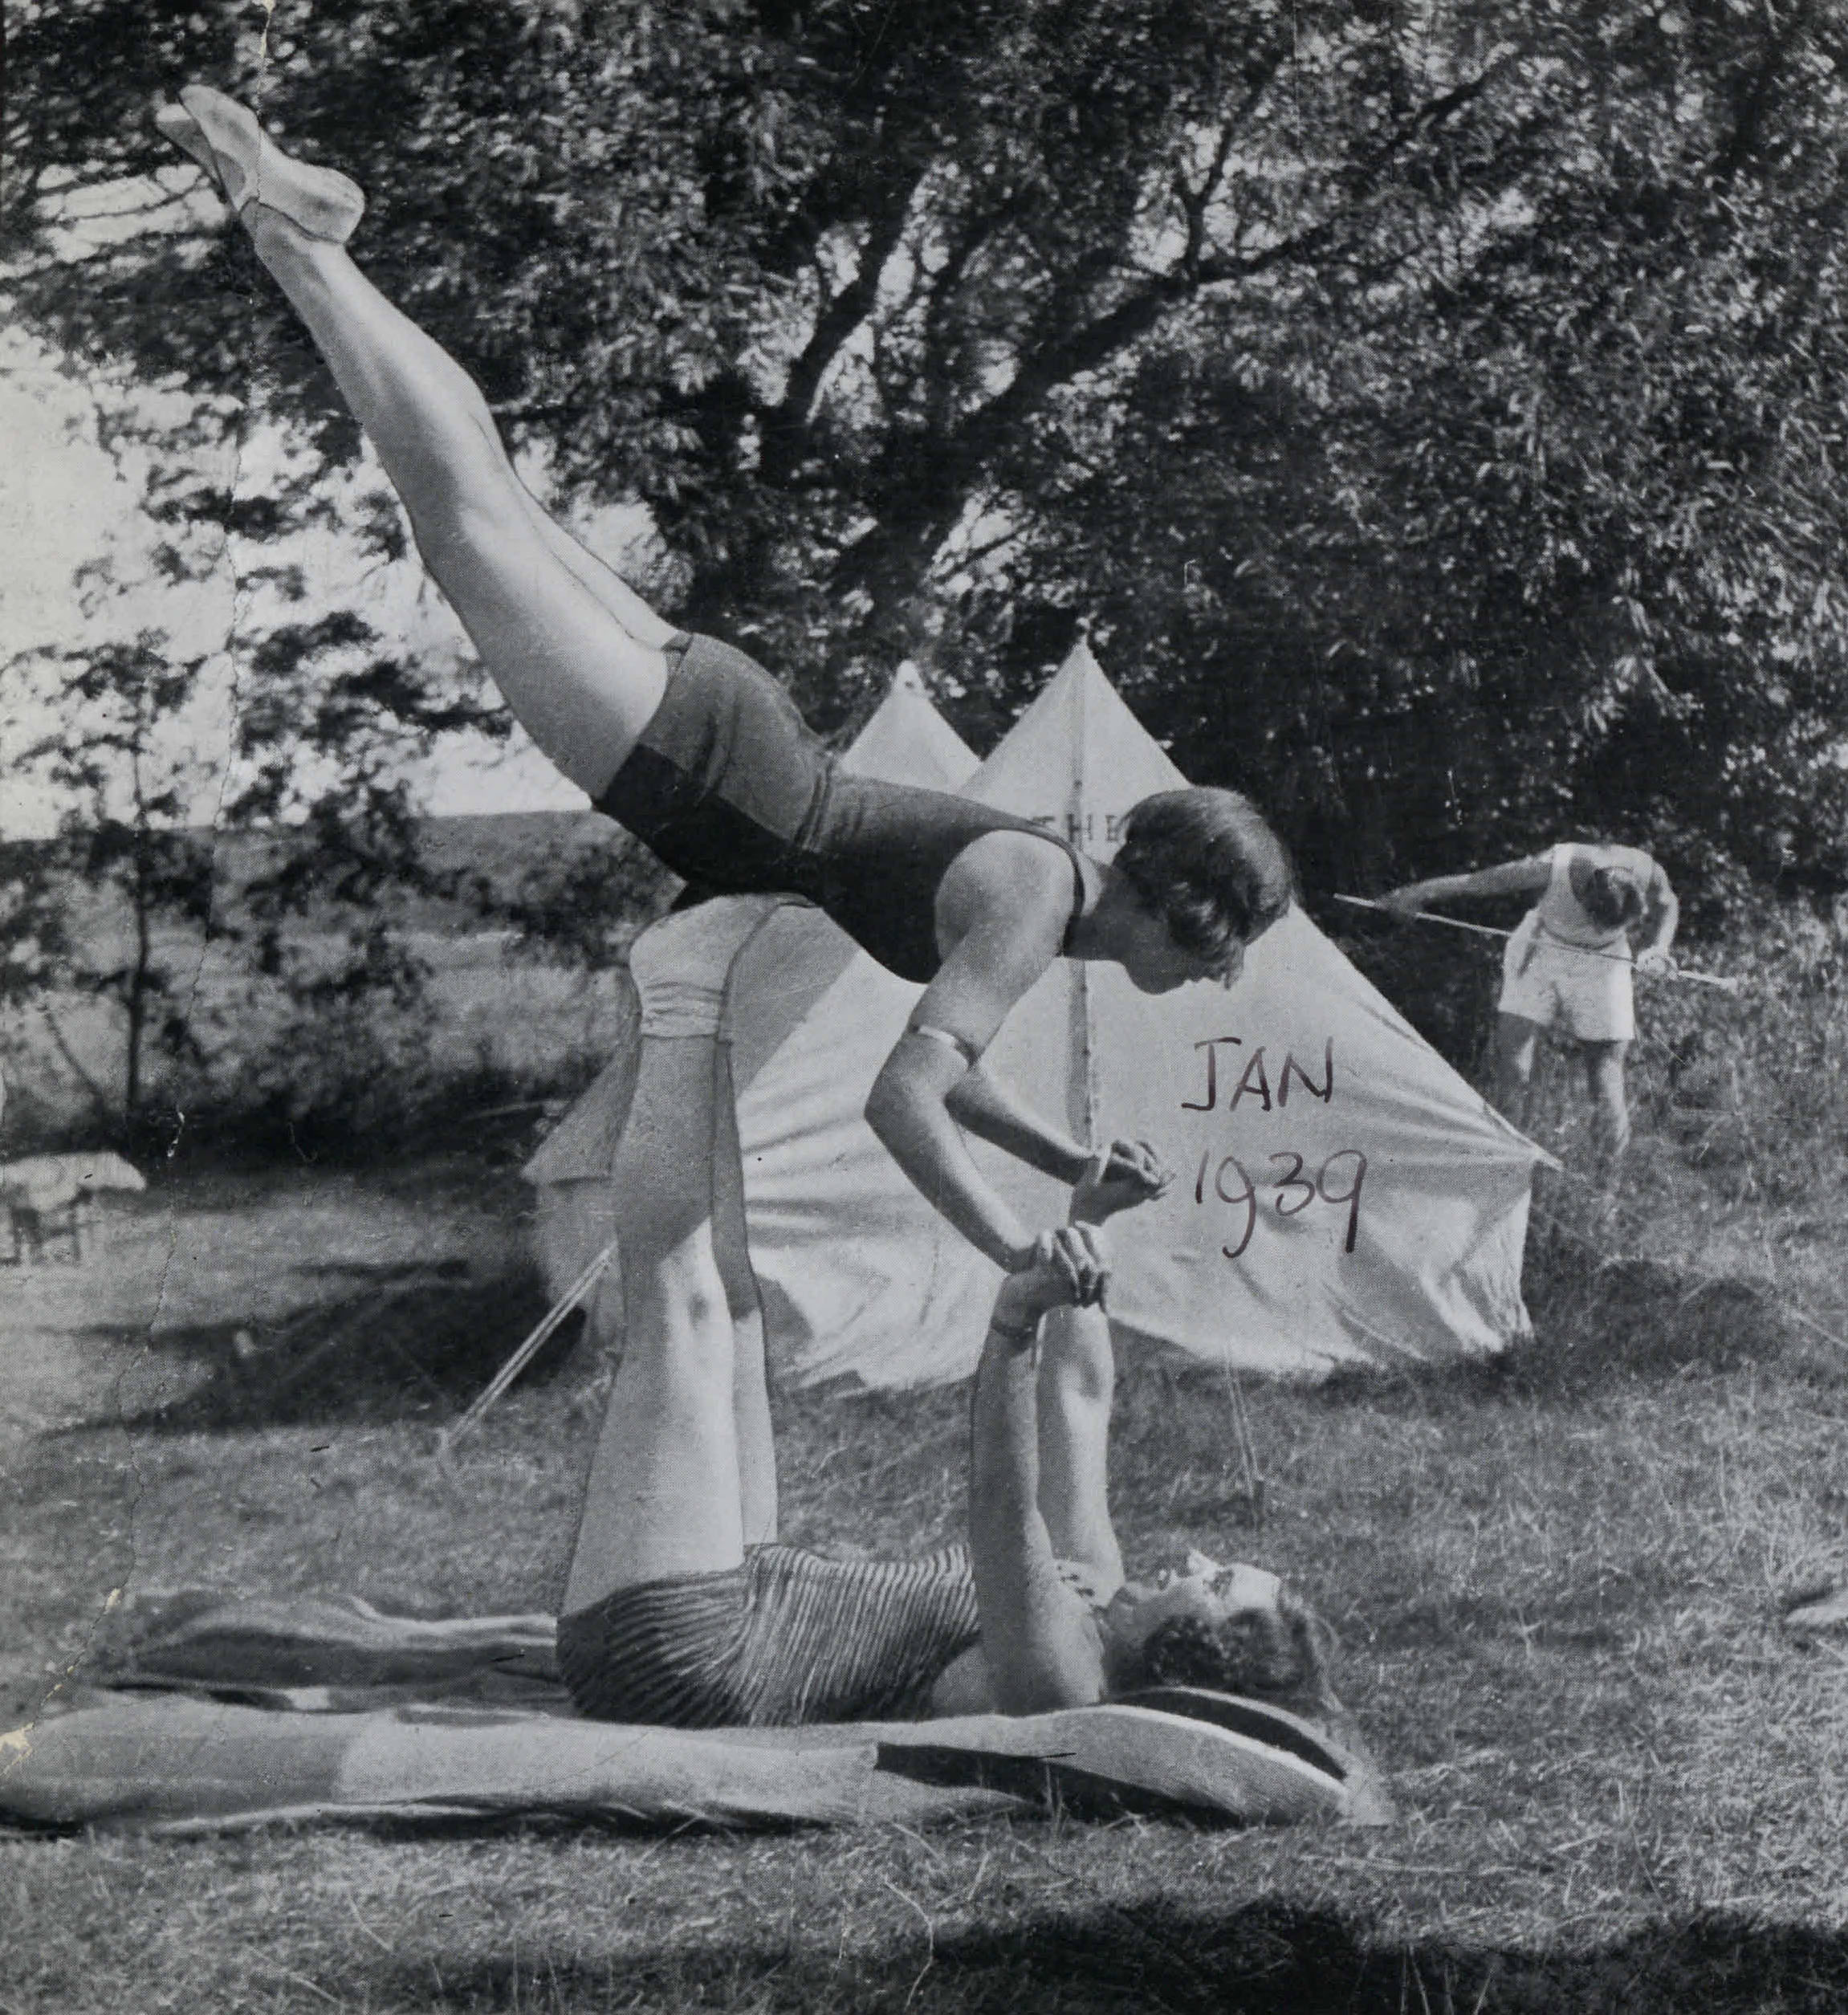 Two women performing gymnastics. From Block Records 1 [Photo Album]. Copyright The Camping and Caravanning Club Archive